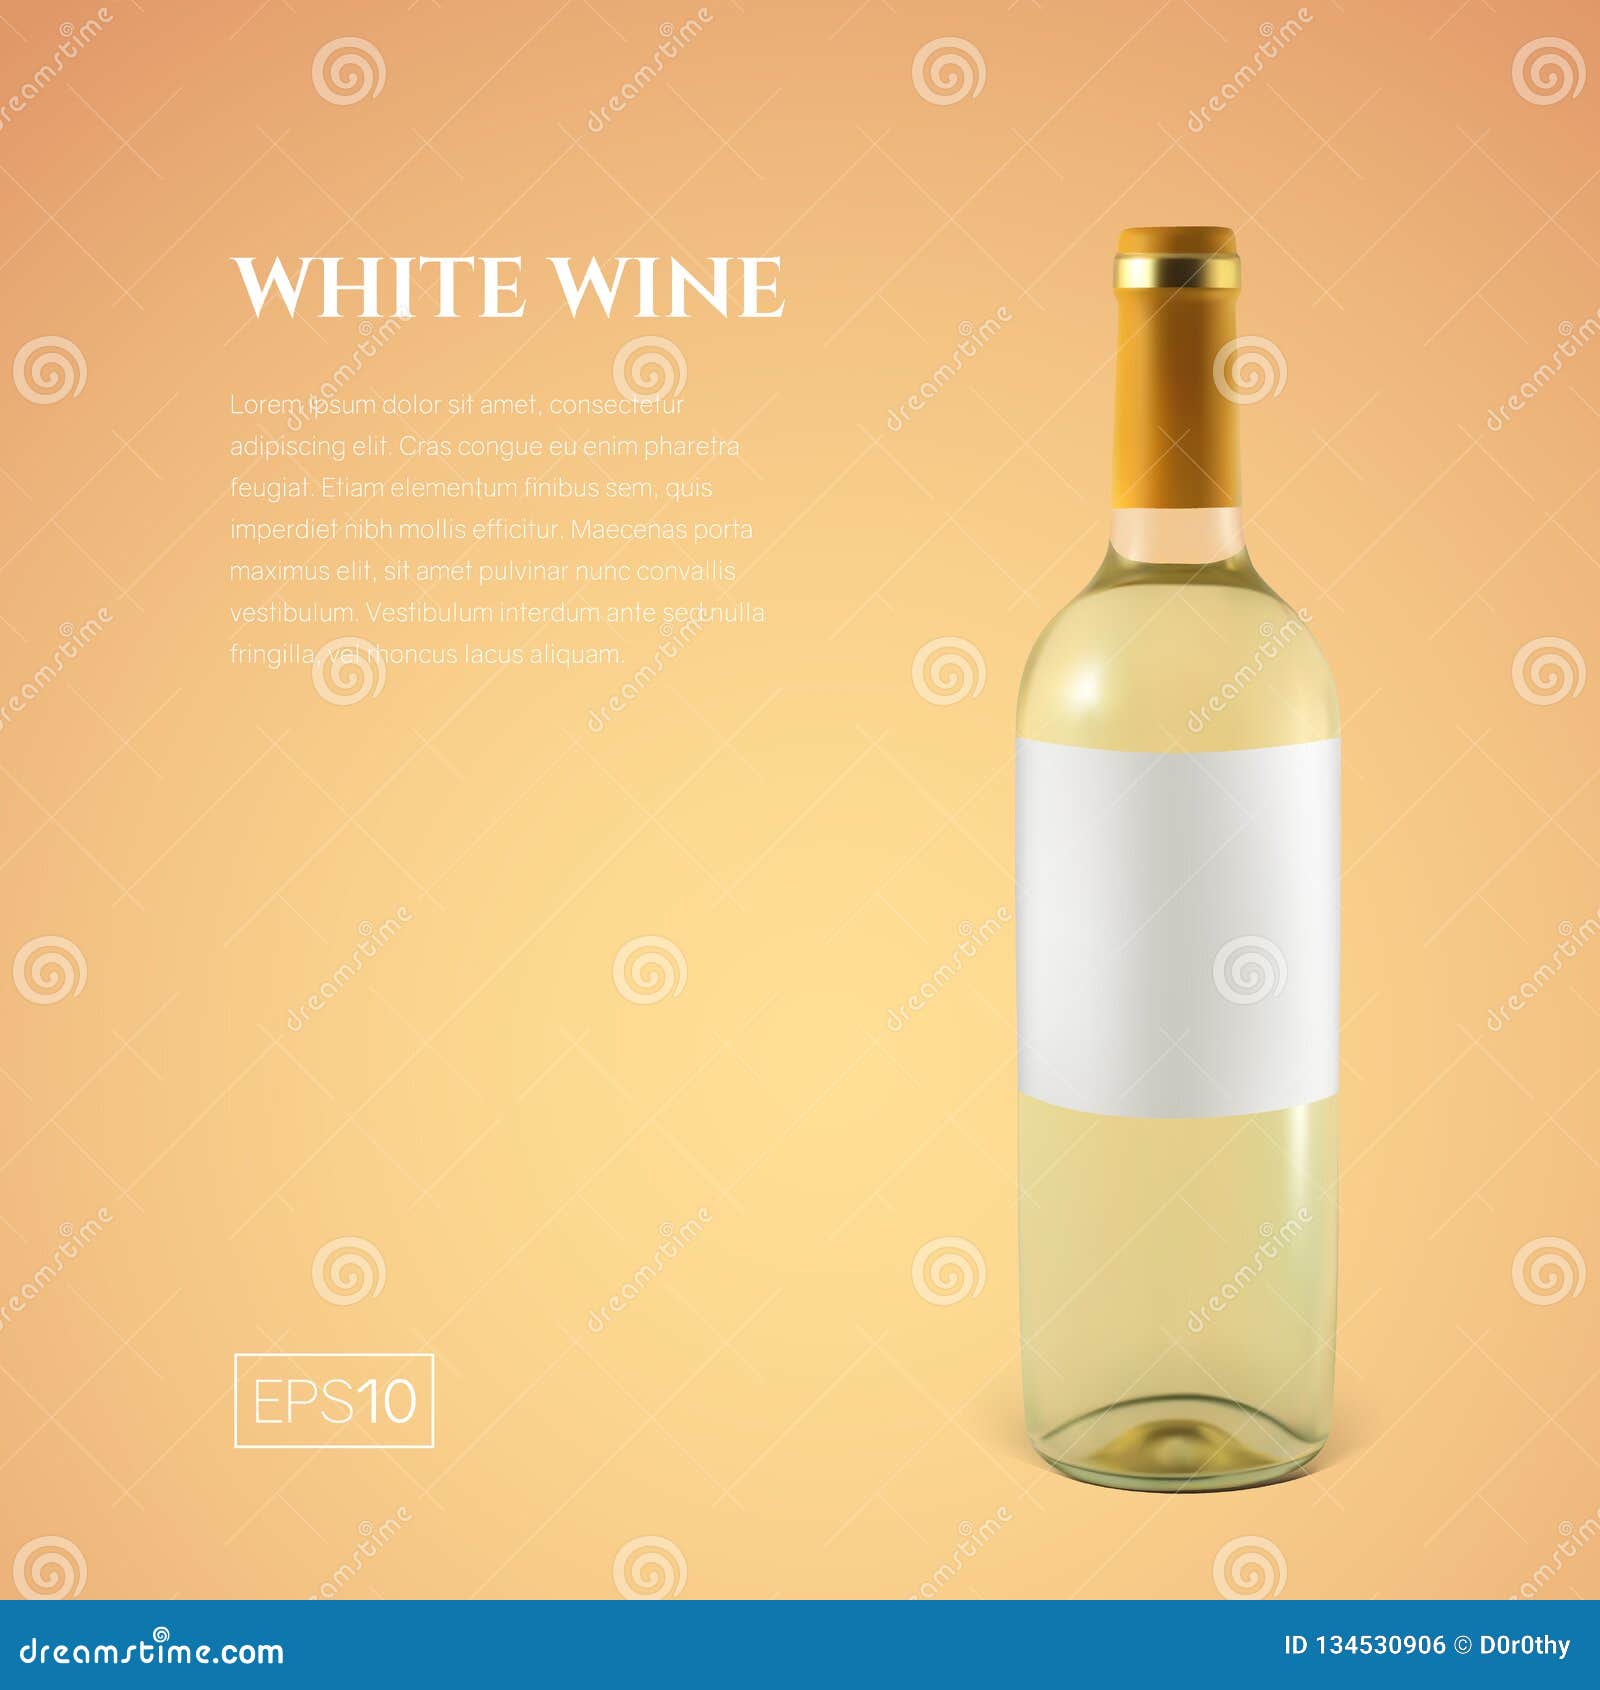 Download Photorealistic Bottle Of White Wine On A Yellow Background Stock Vector Illustration Of Background Bordeaux 134530906 Yellowimages Mockups